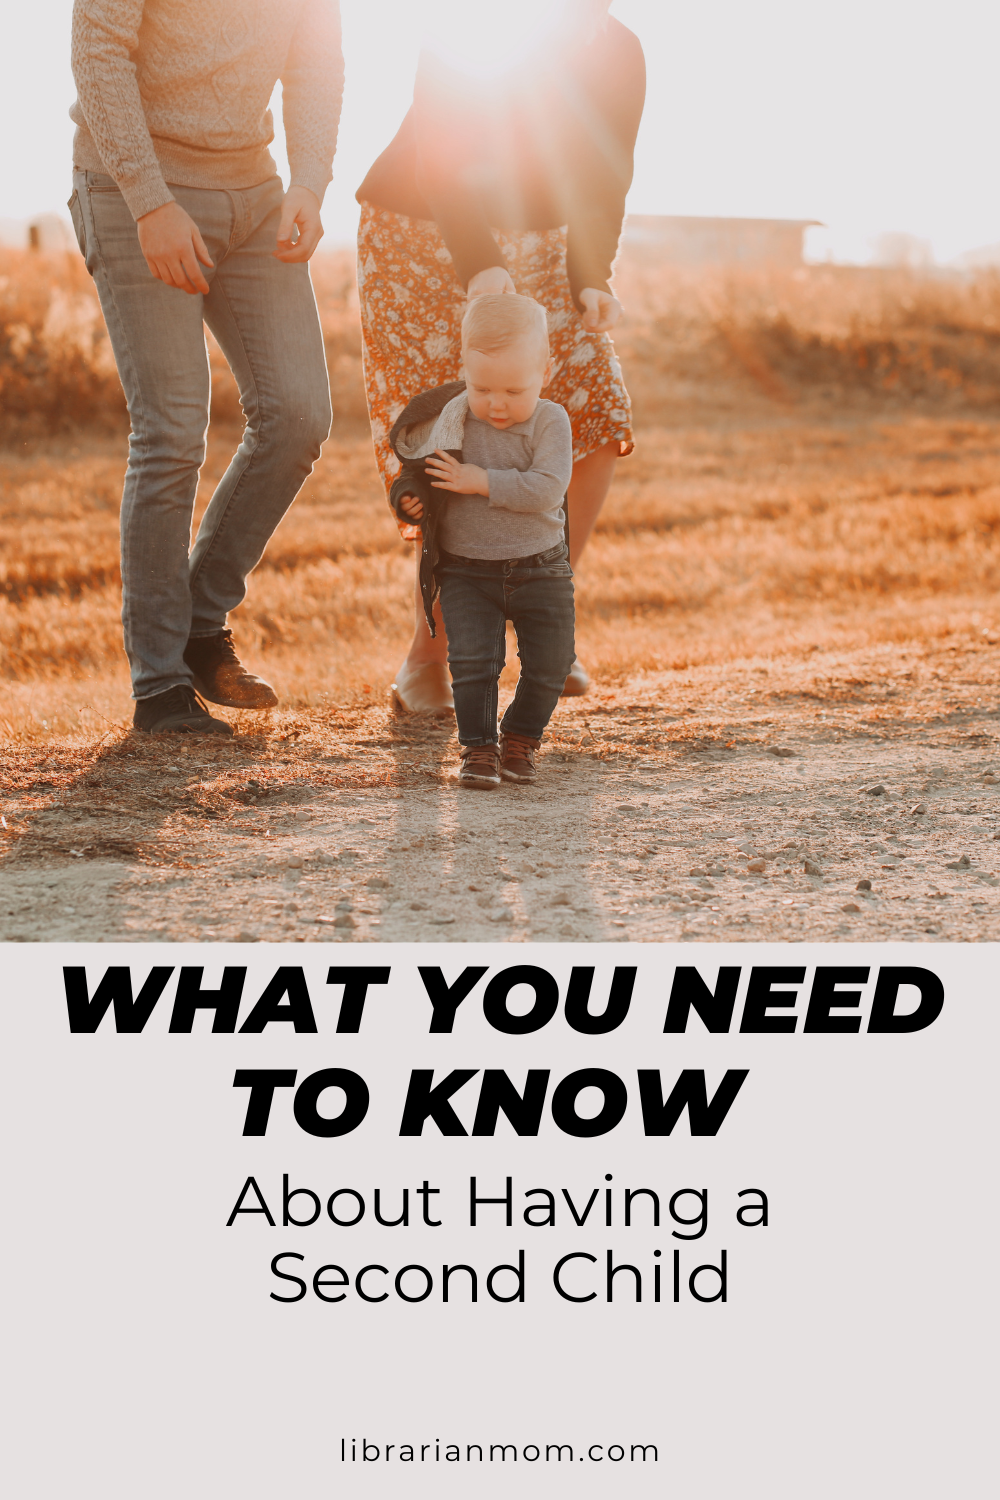 Mom and dad with toddler with text "what you need to know about having a second child"